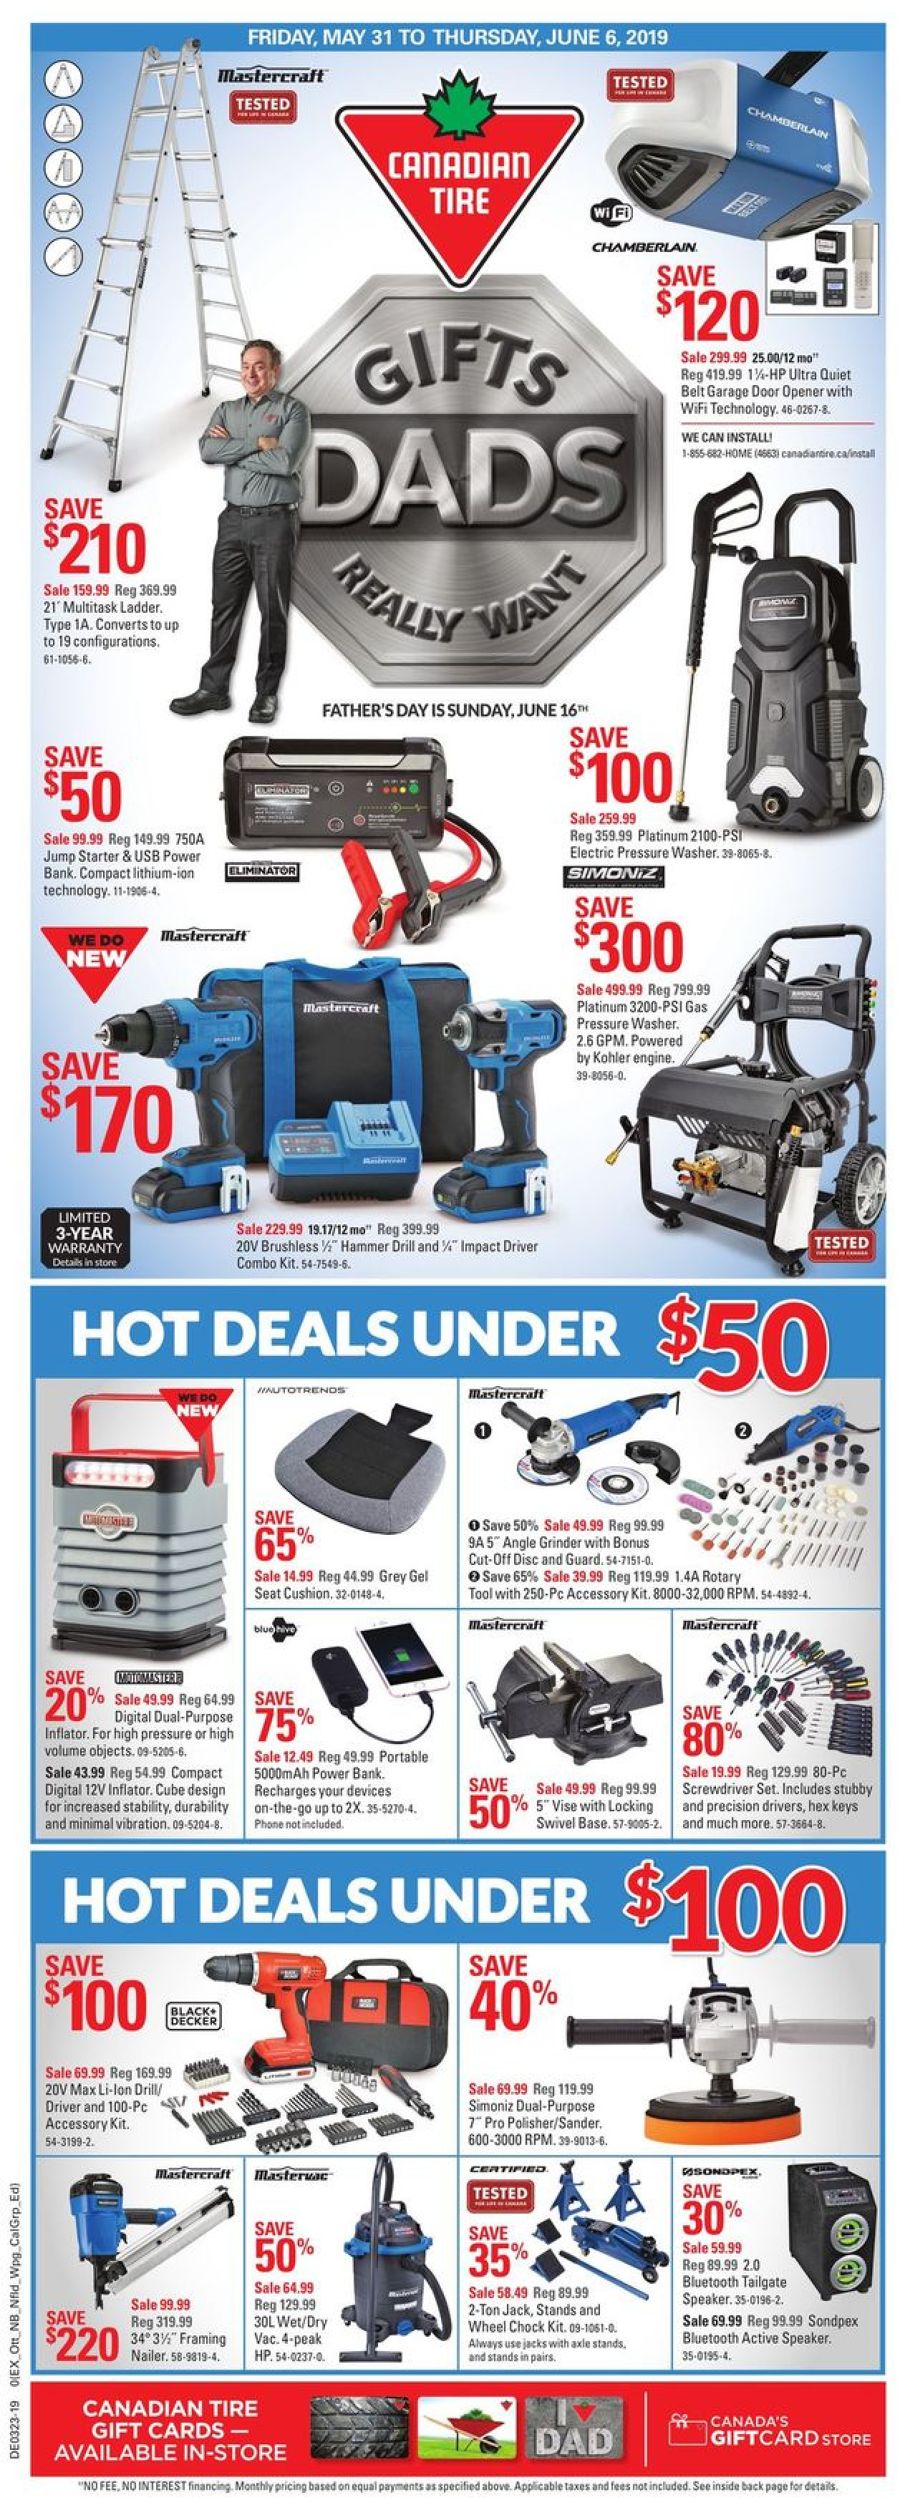 Canadian Tire Flyer - 05/31-06/06/2019